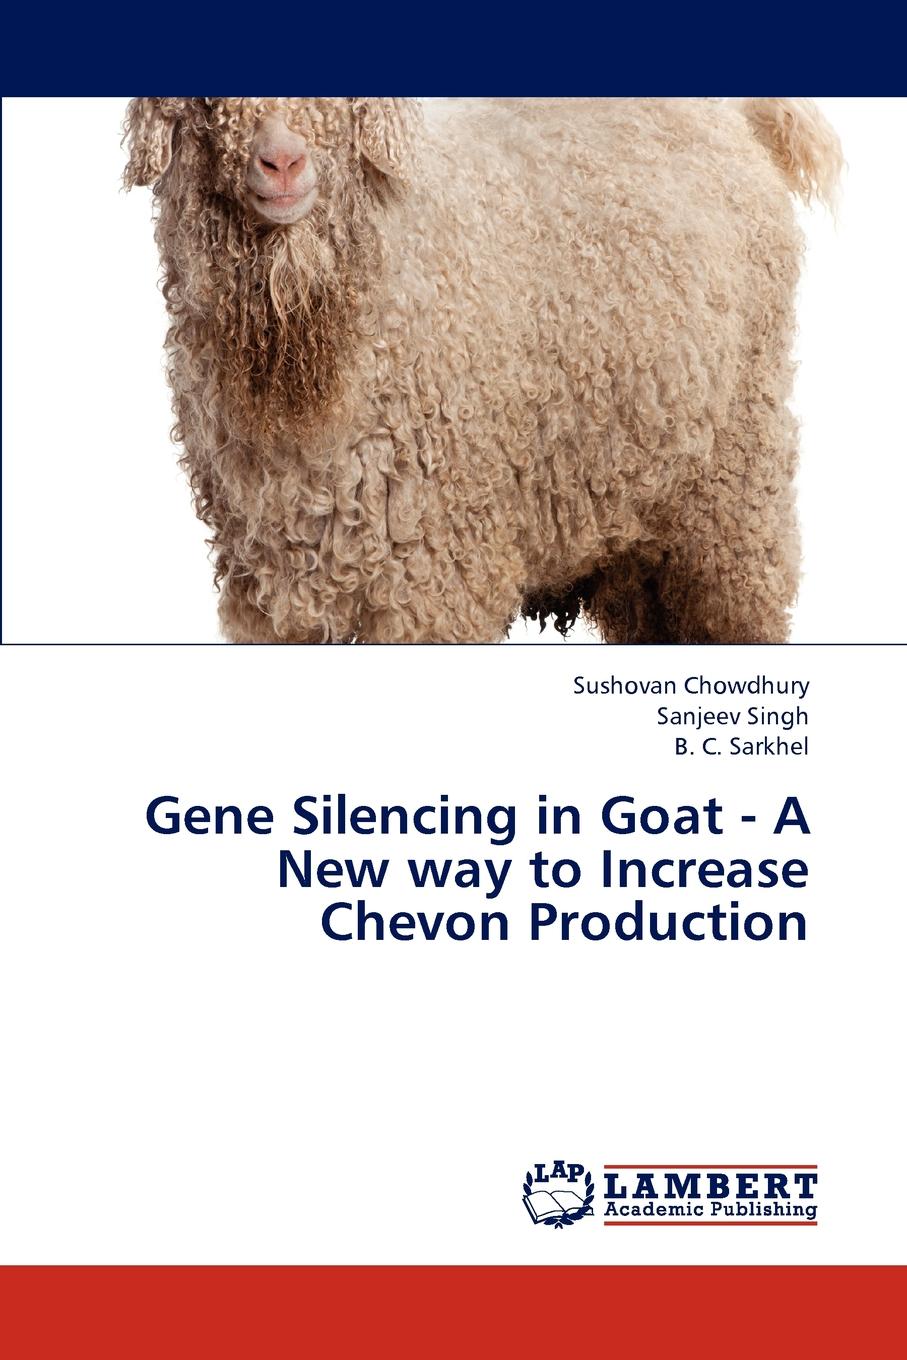 Gene Silencing in Goat - A New Way to Increase Chevon Production